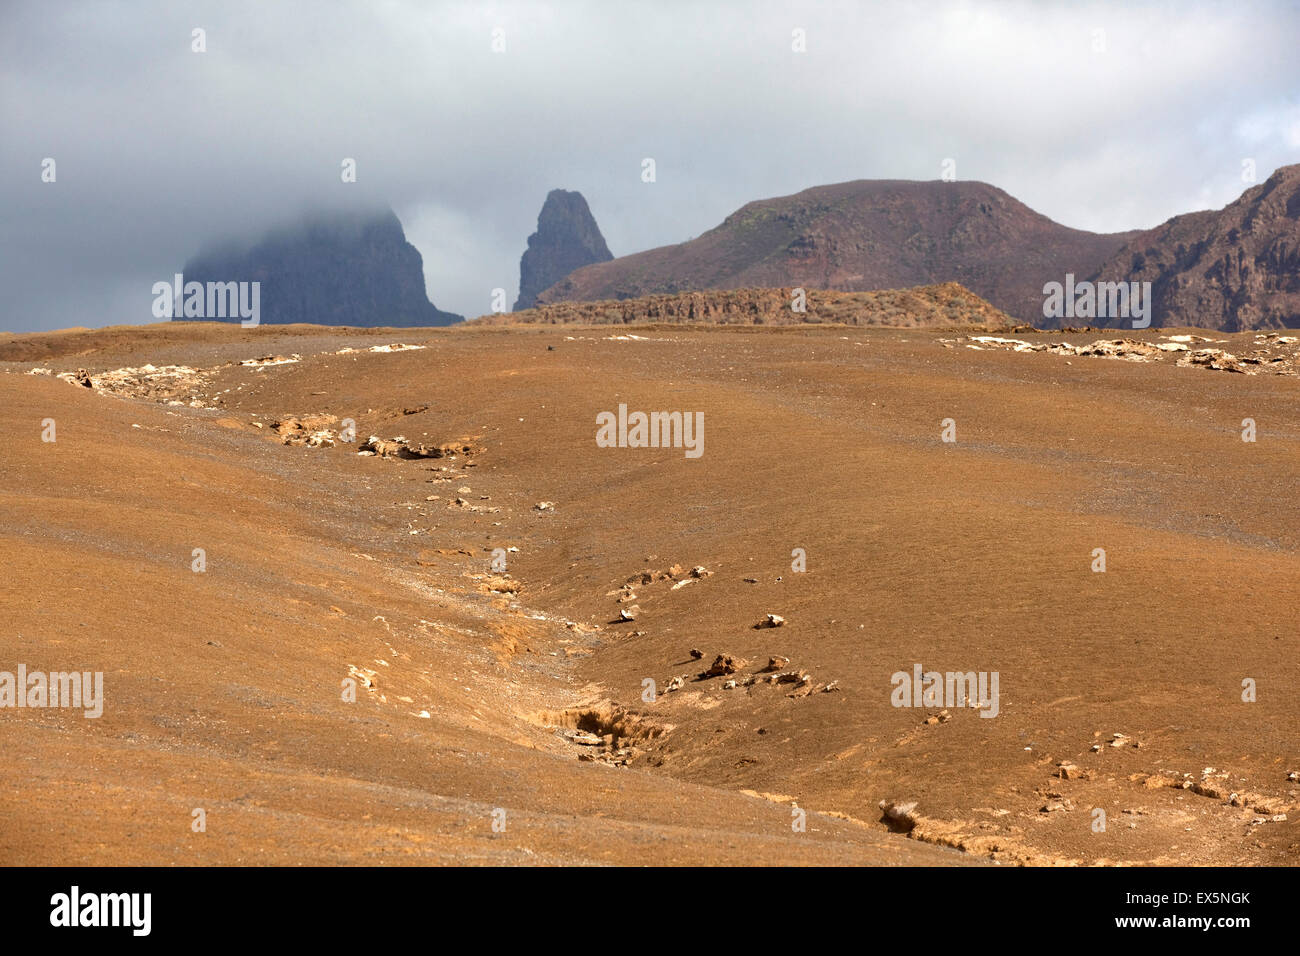 Arid landscape with yellow sand and volcanic peaks on the island São Nicolau, Cape Verde / Cabo Verde, Western Africa Stock Photo